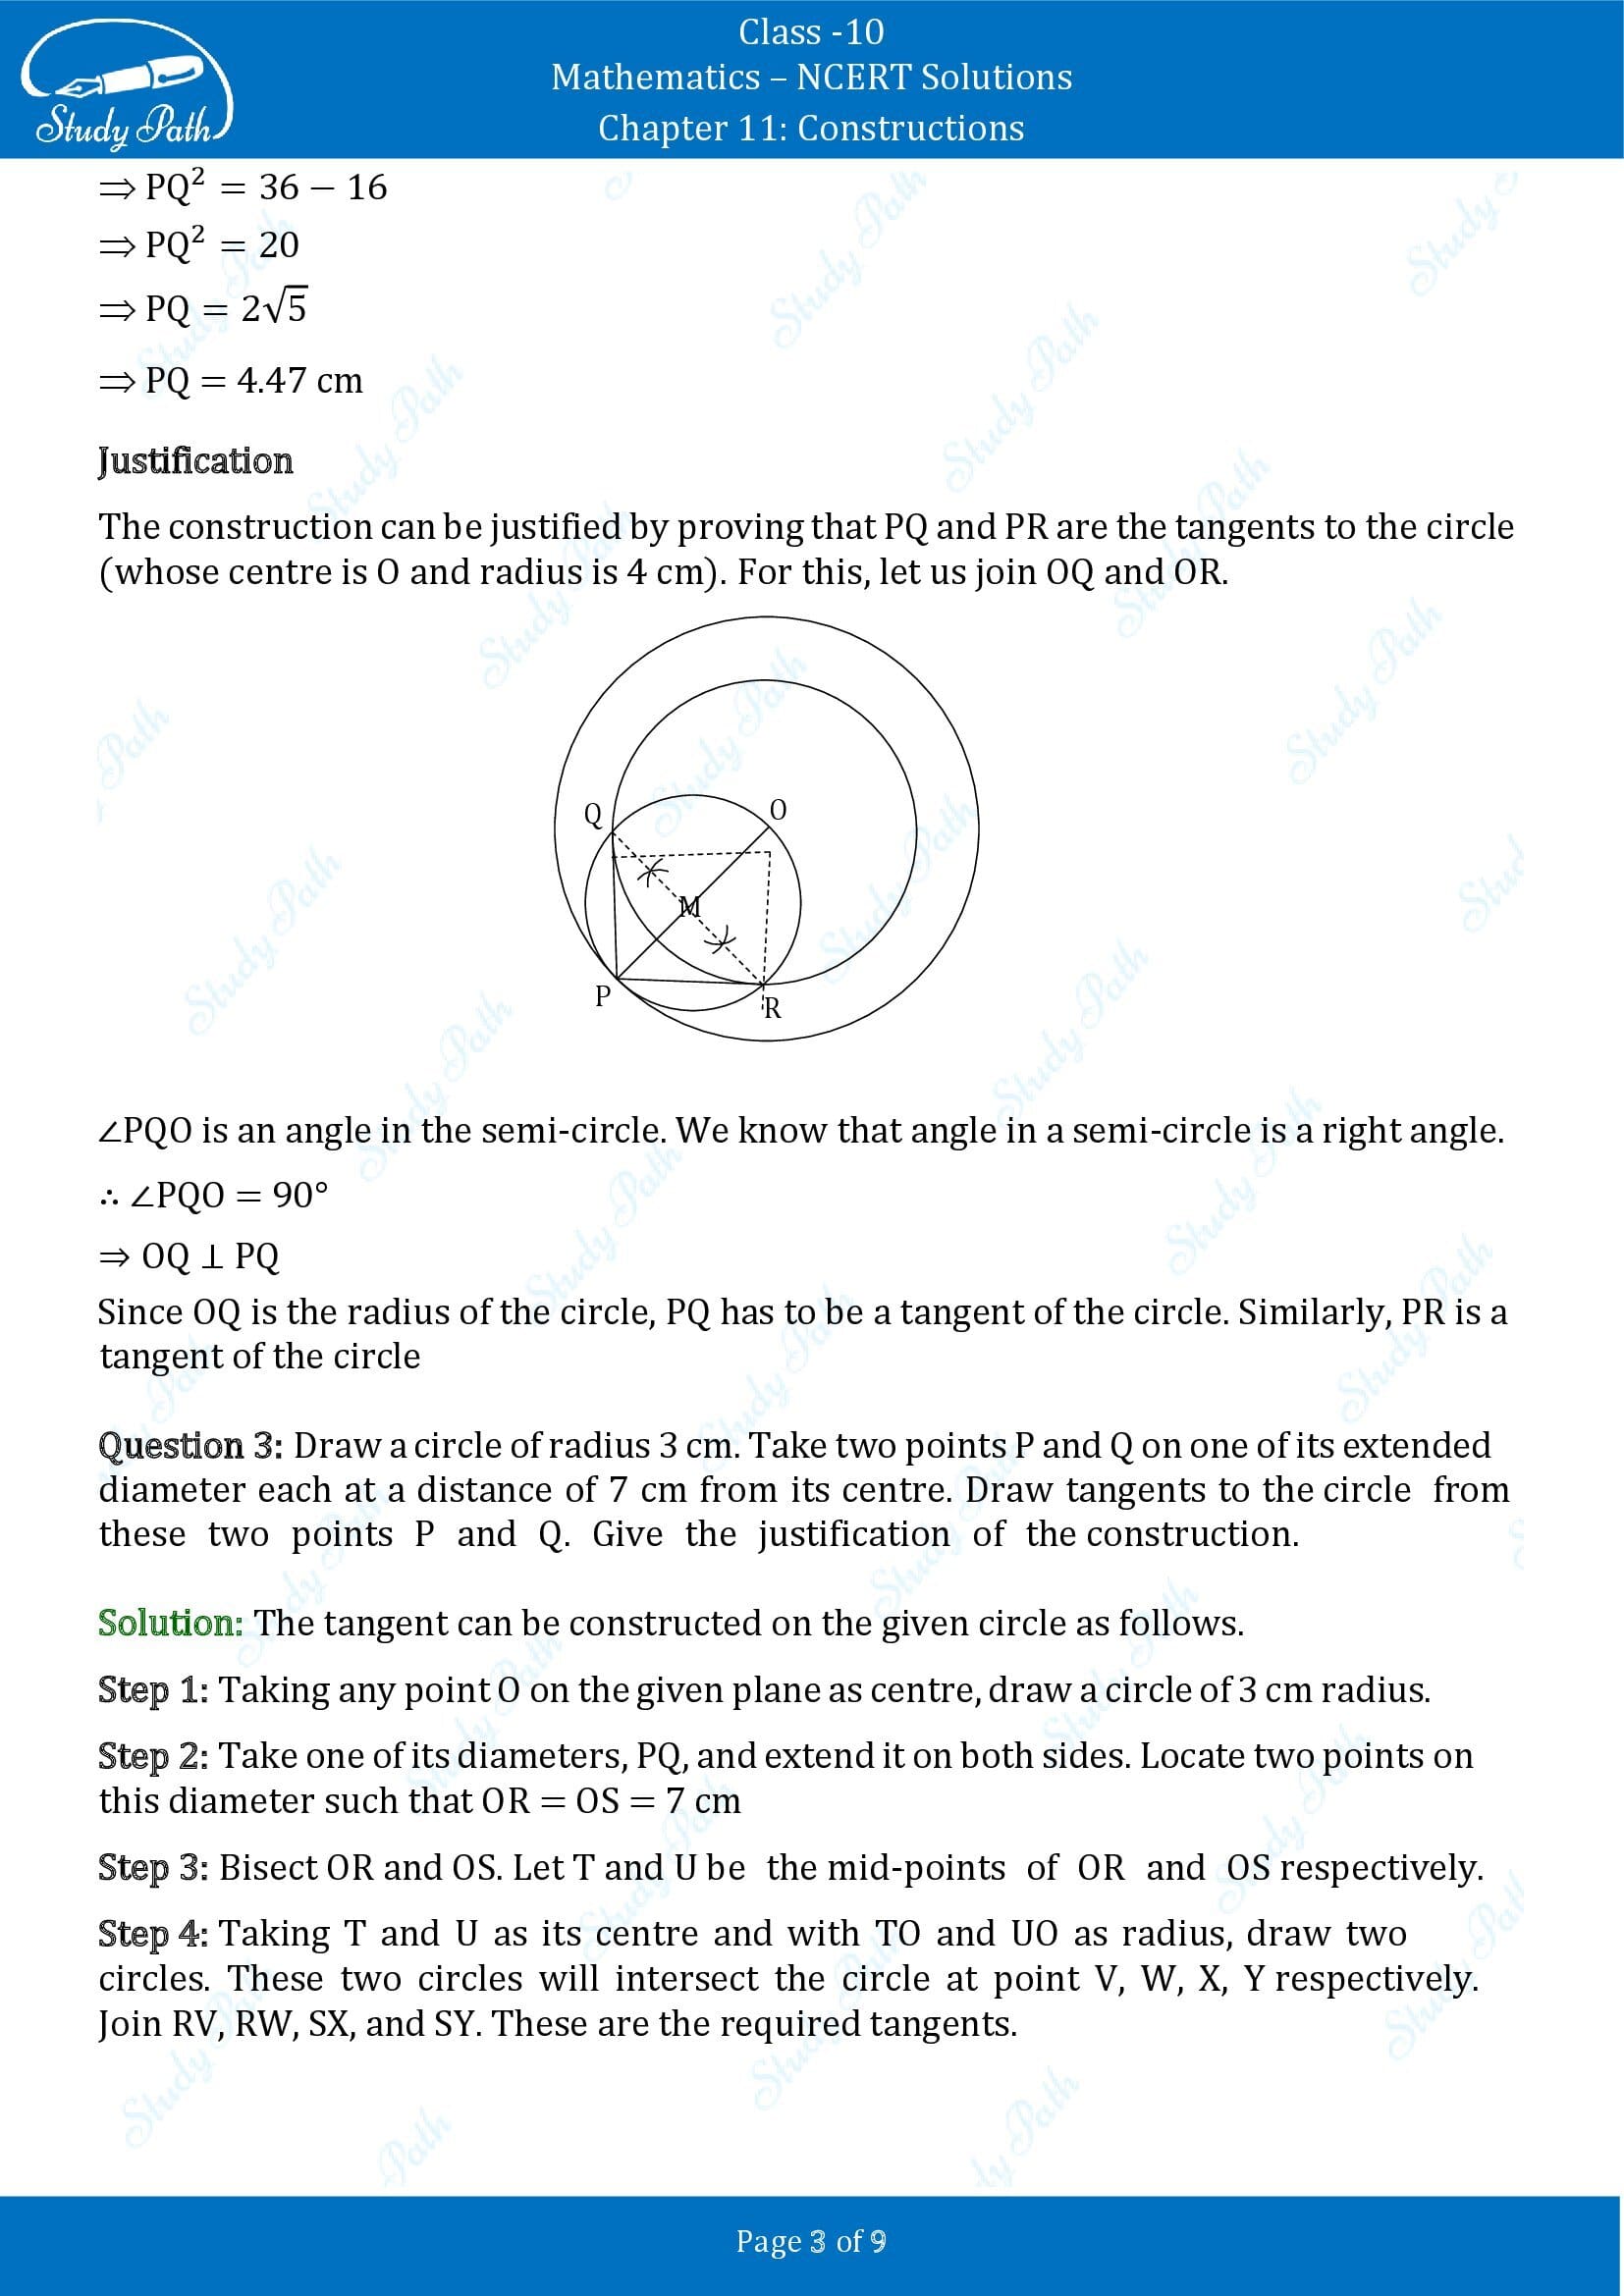 NCERT Solutions for Class 10 Maths Chapter 11 Constructions Exercise 11.2 00003